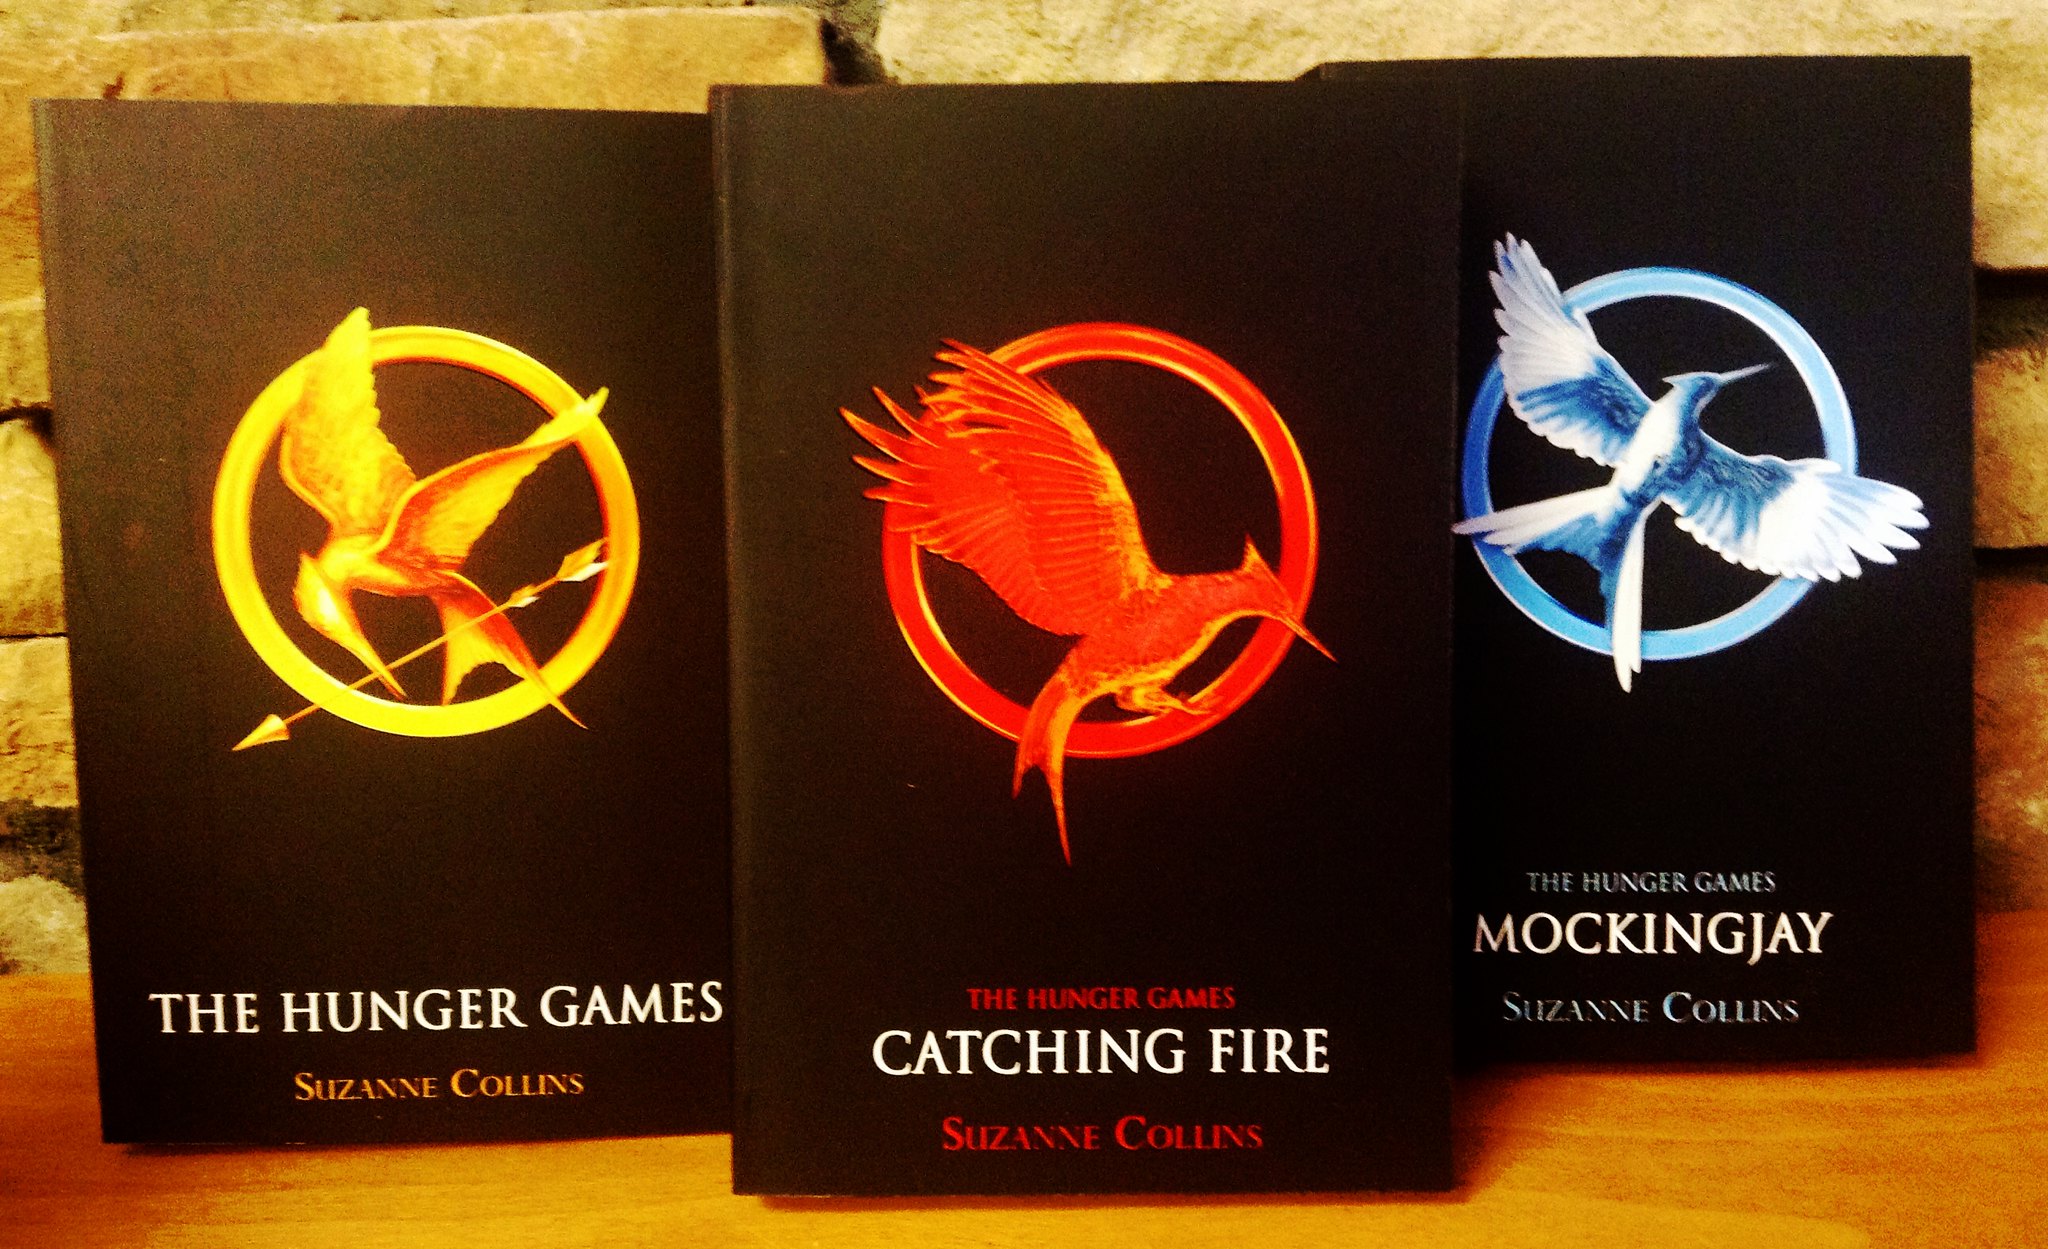 what is the order of the hunger games books